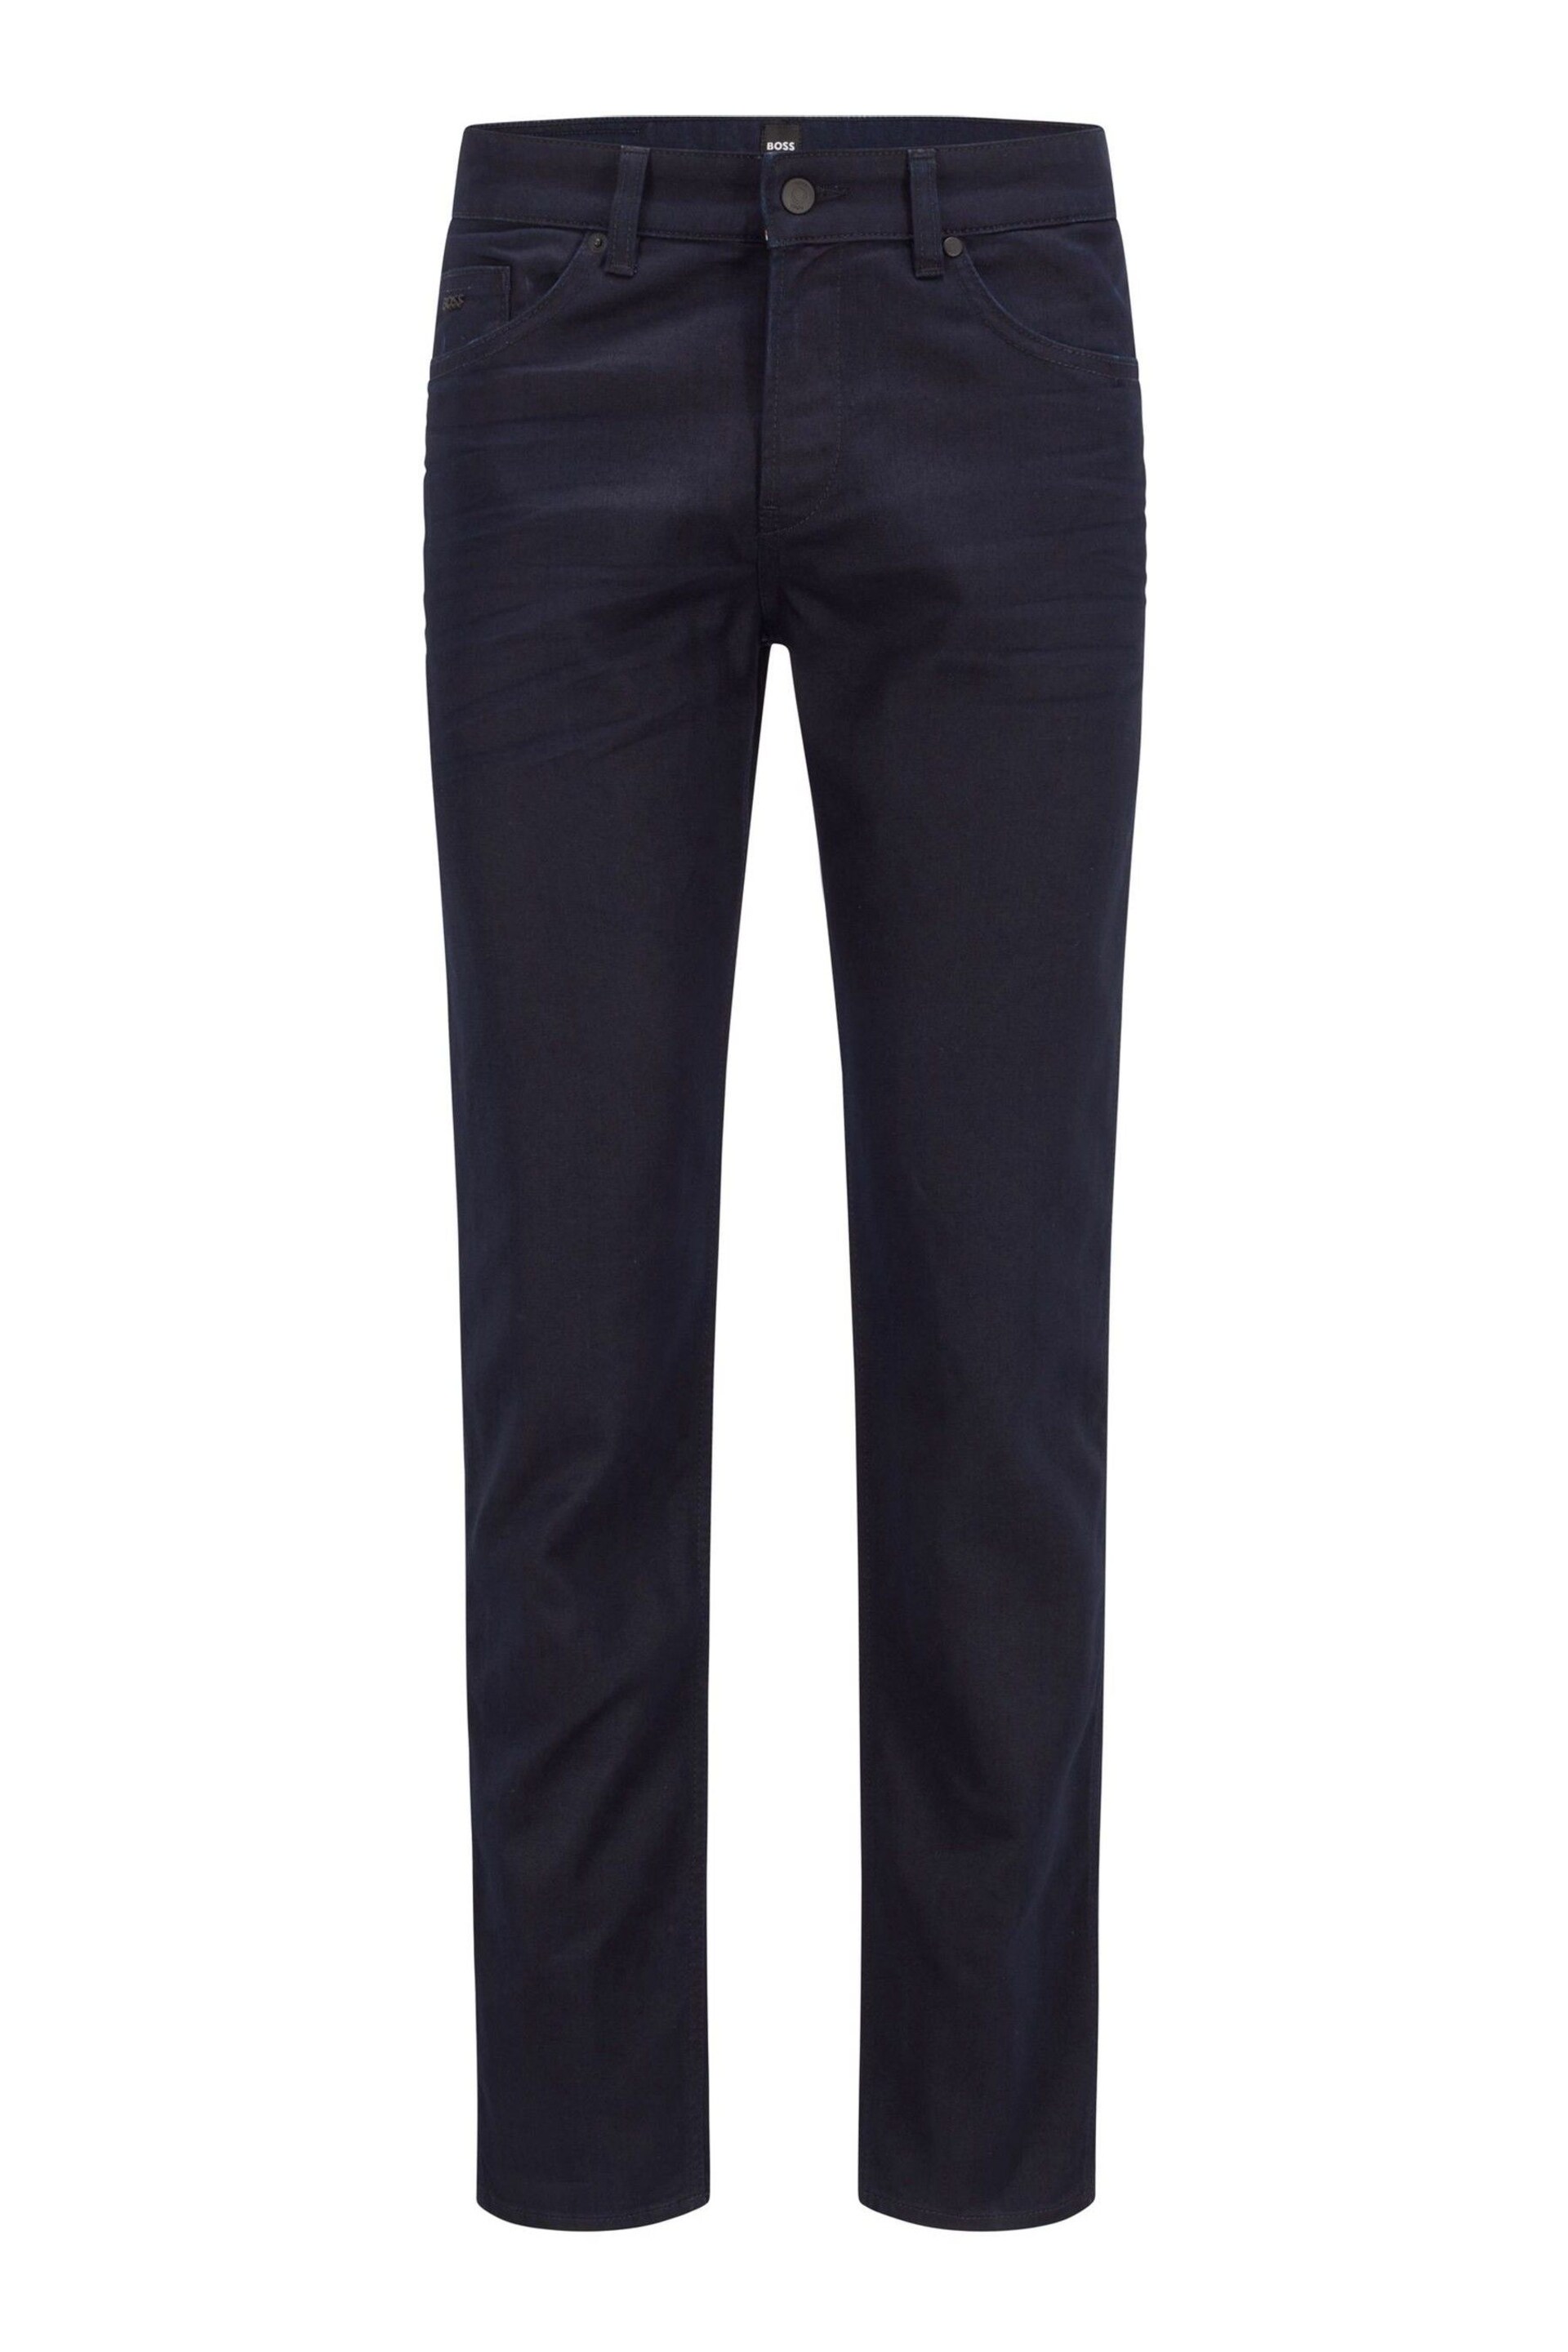 BOSS Blue Delaware Slim Fit Stretch Jeans - Image 5 of 5